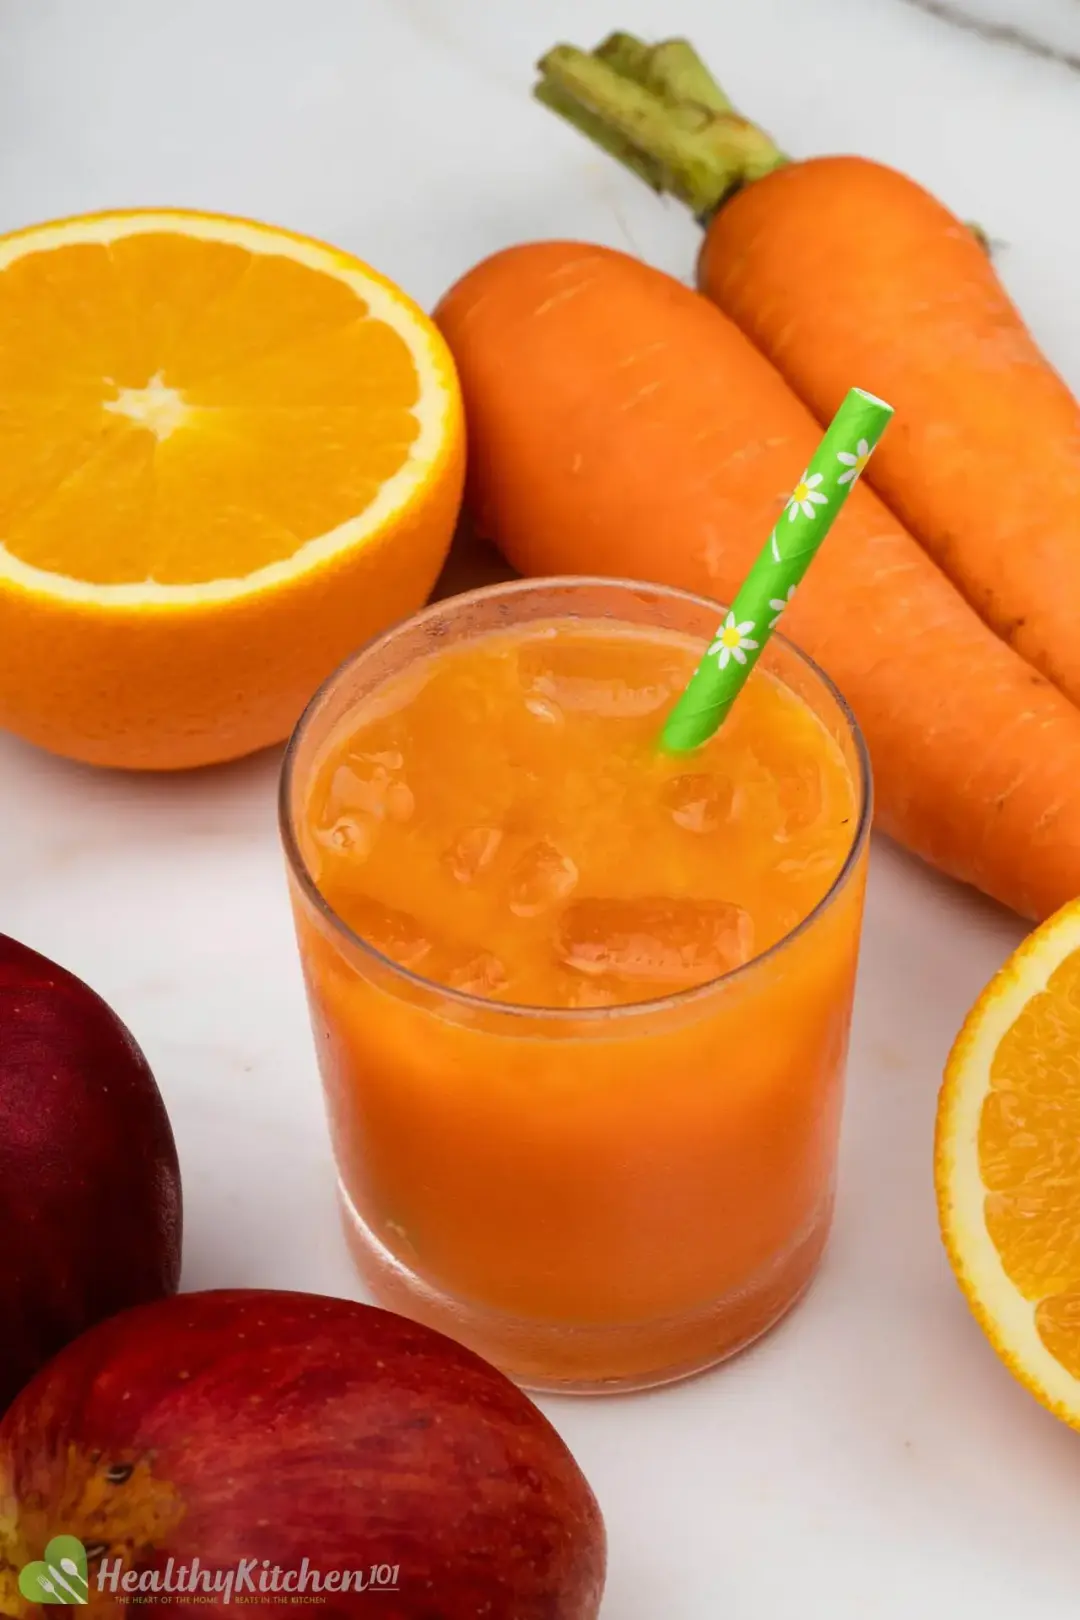 A short glass of iced carrot apple drink next to some red apples, orange halves, and whole carrots